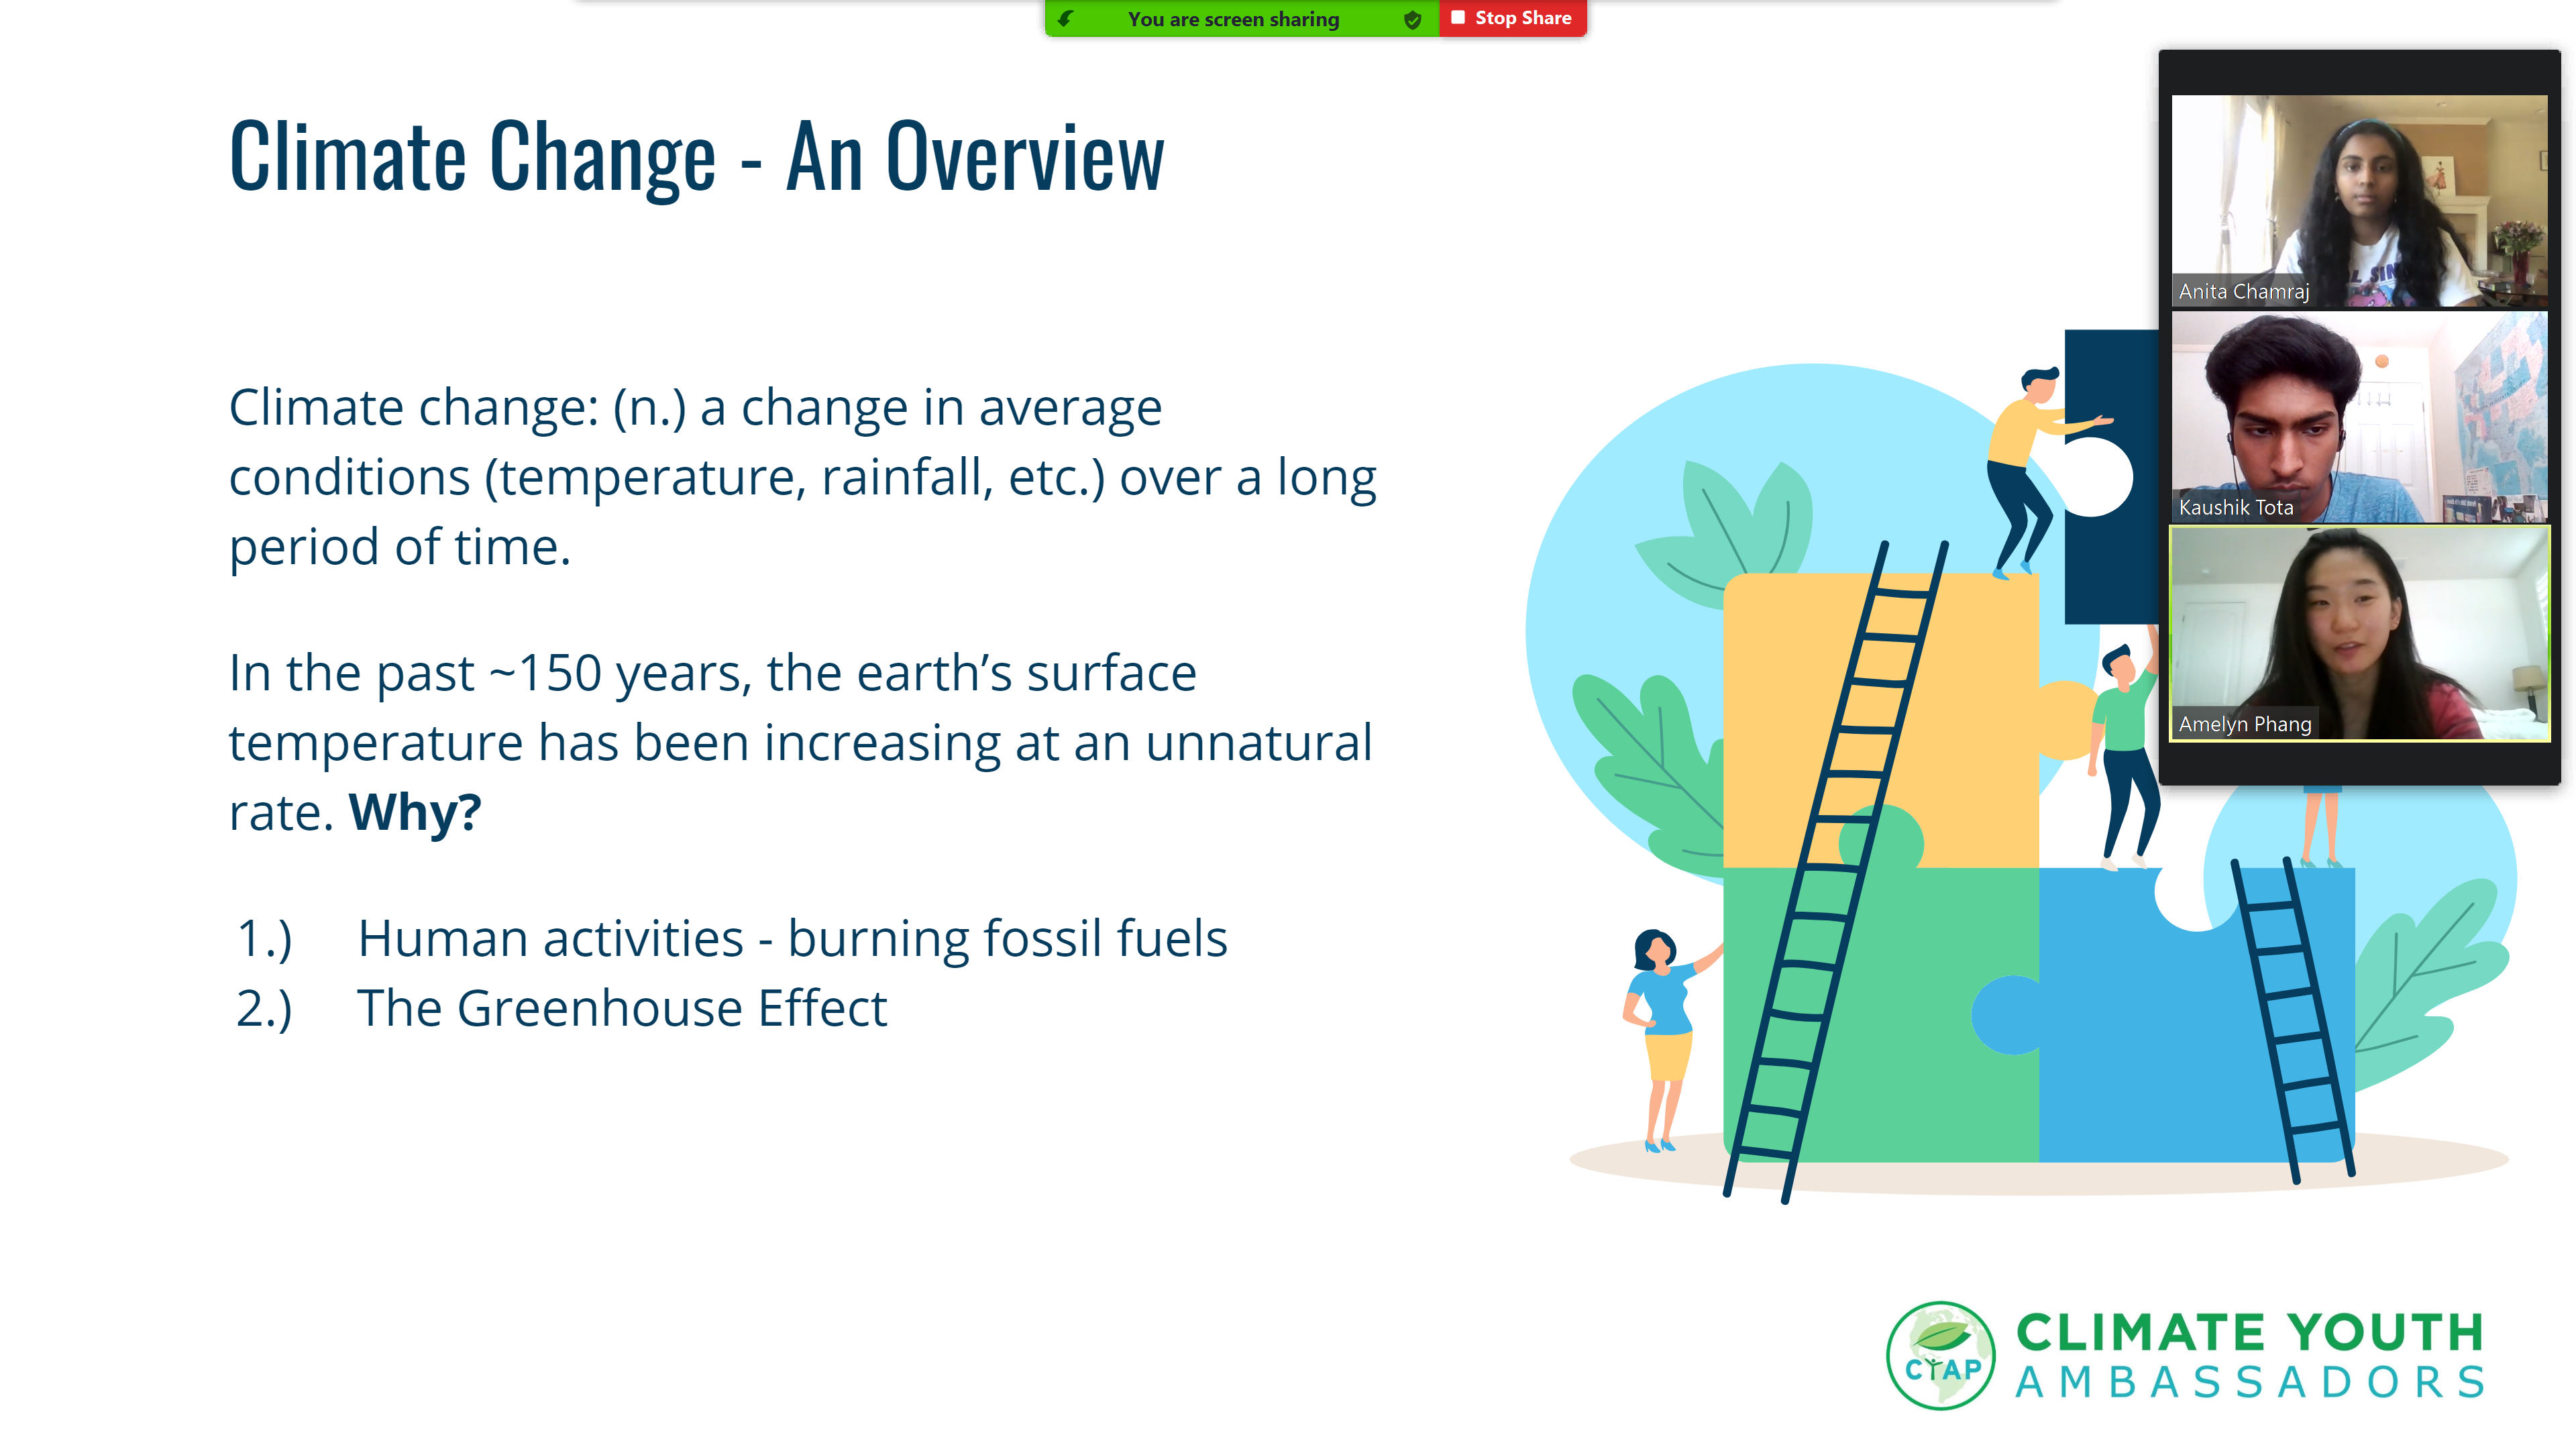 Virtual presentation "Climate Change - An Overview"